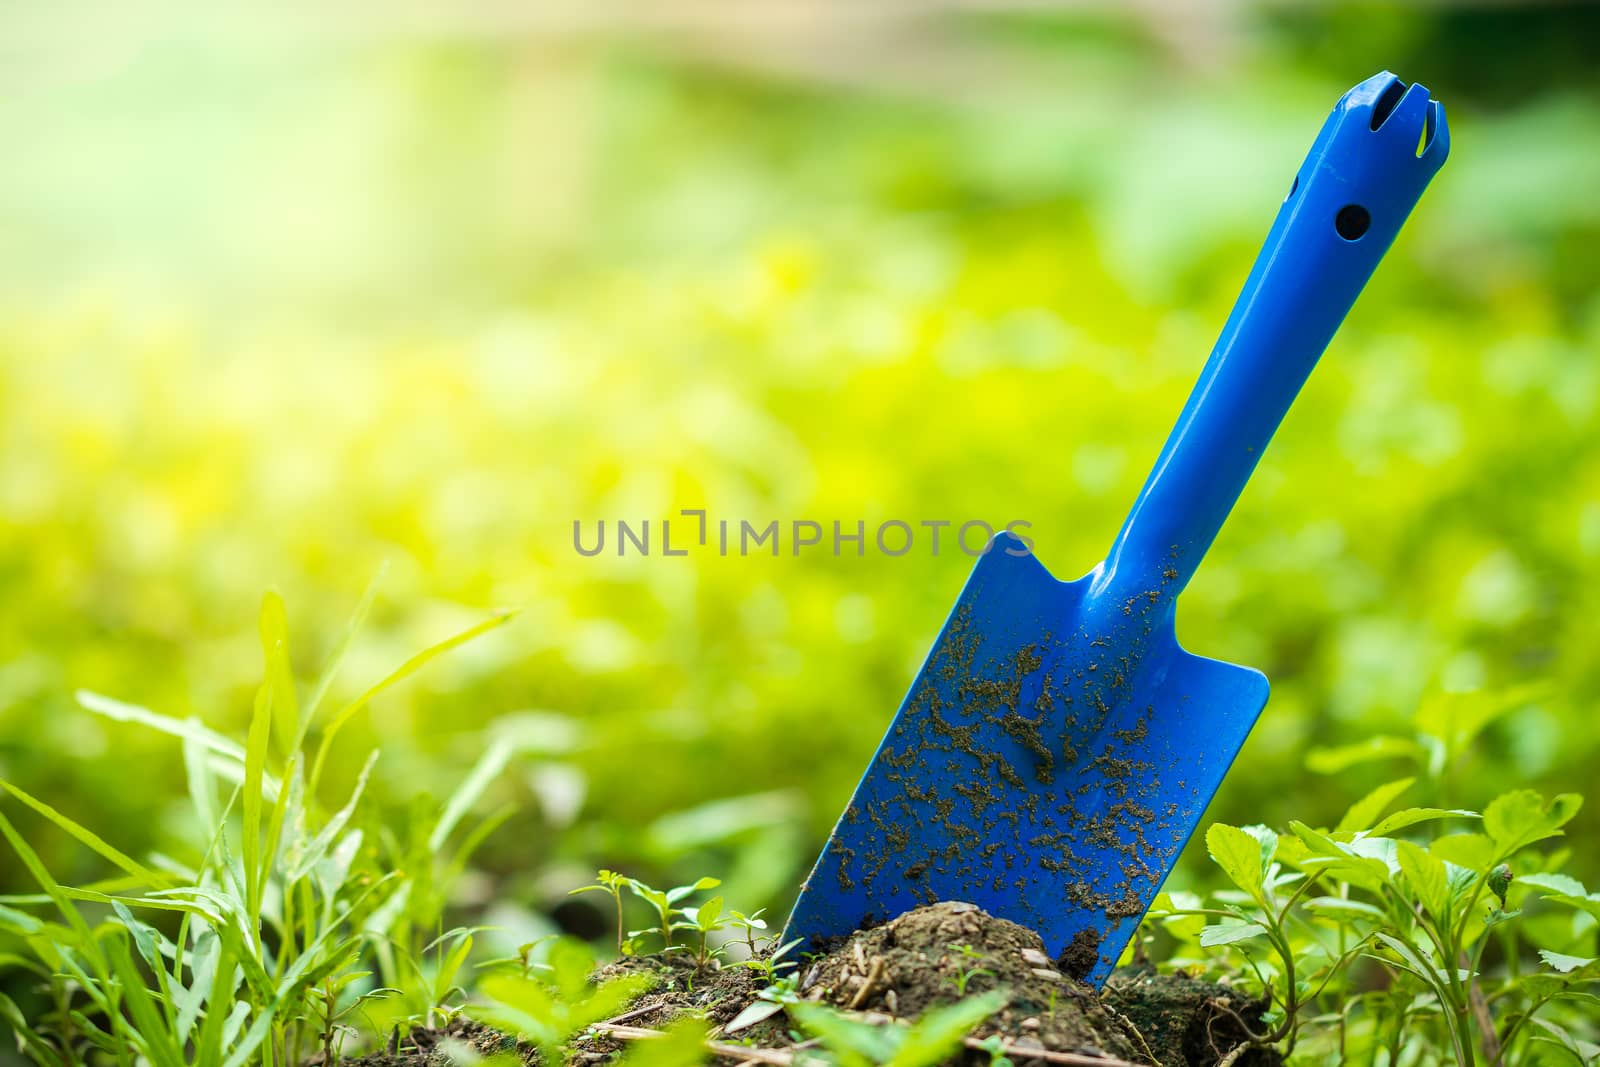 Yard garden tools and vegetable garden. Trowel stuck in the ground and morning sunlight at organic farm. Concept of agriculture. Closeup and copy space for text.